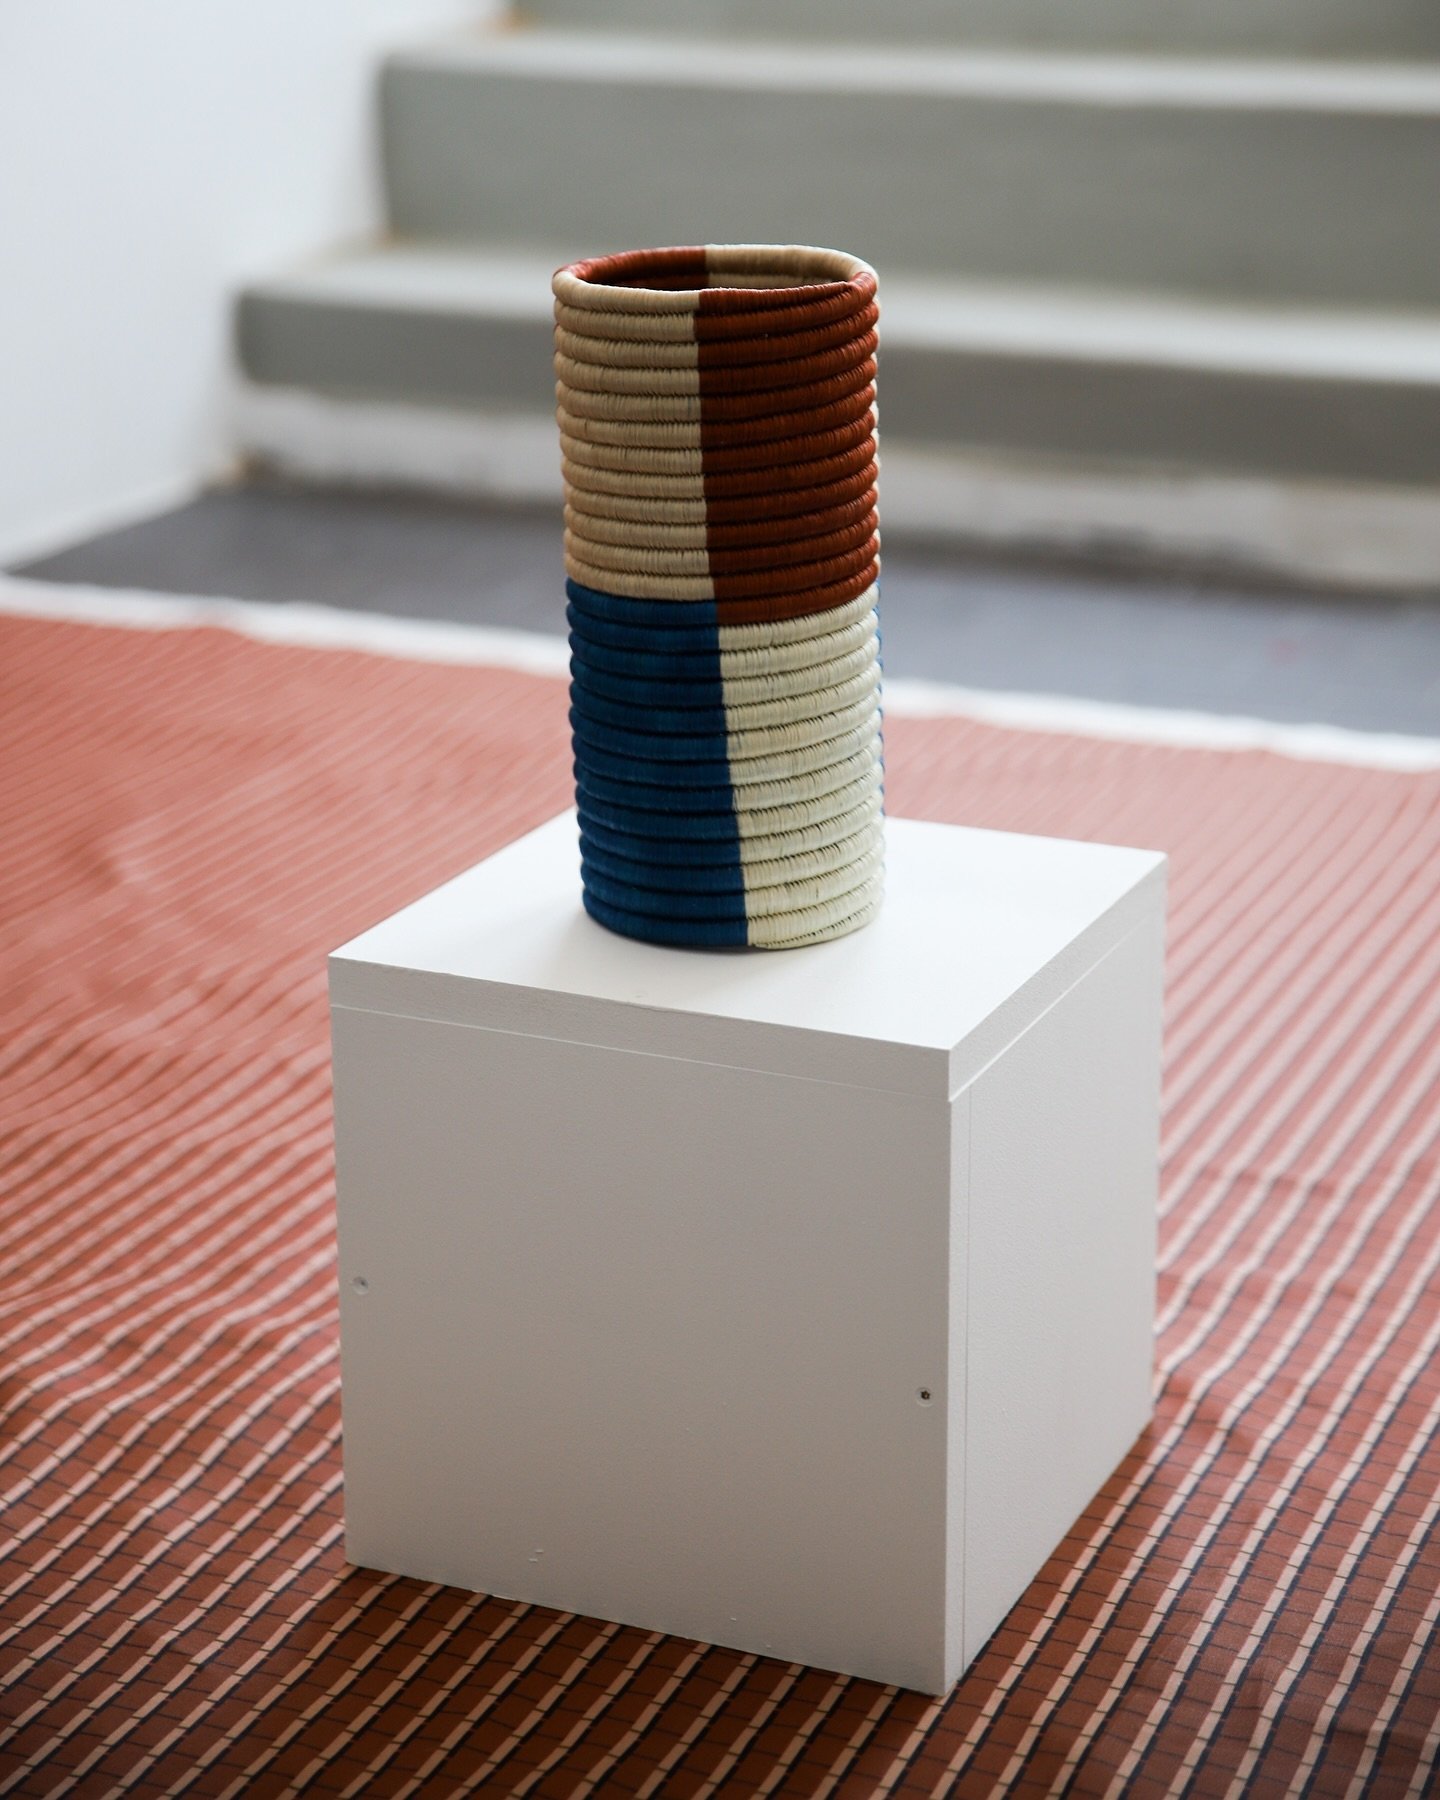 Textile &lsquo;VIBRANT 02 TERRACOTTA&rsquo; by Pauline Deltour, in conversation with her Choco Vases edited by Ames.

ASSAB ONE
MILAN DESIGN WEEK
13-21 APRIL 2024
Via Privata Assab 1, Milano
11 am - 7 pm

Photography by @michela_gallesio